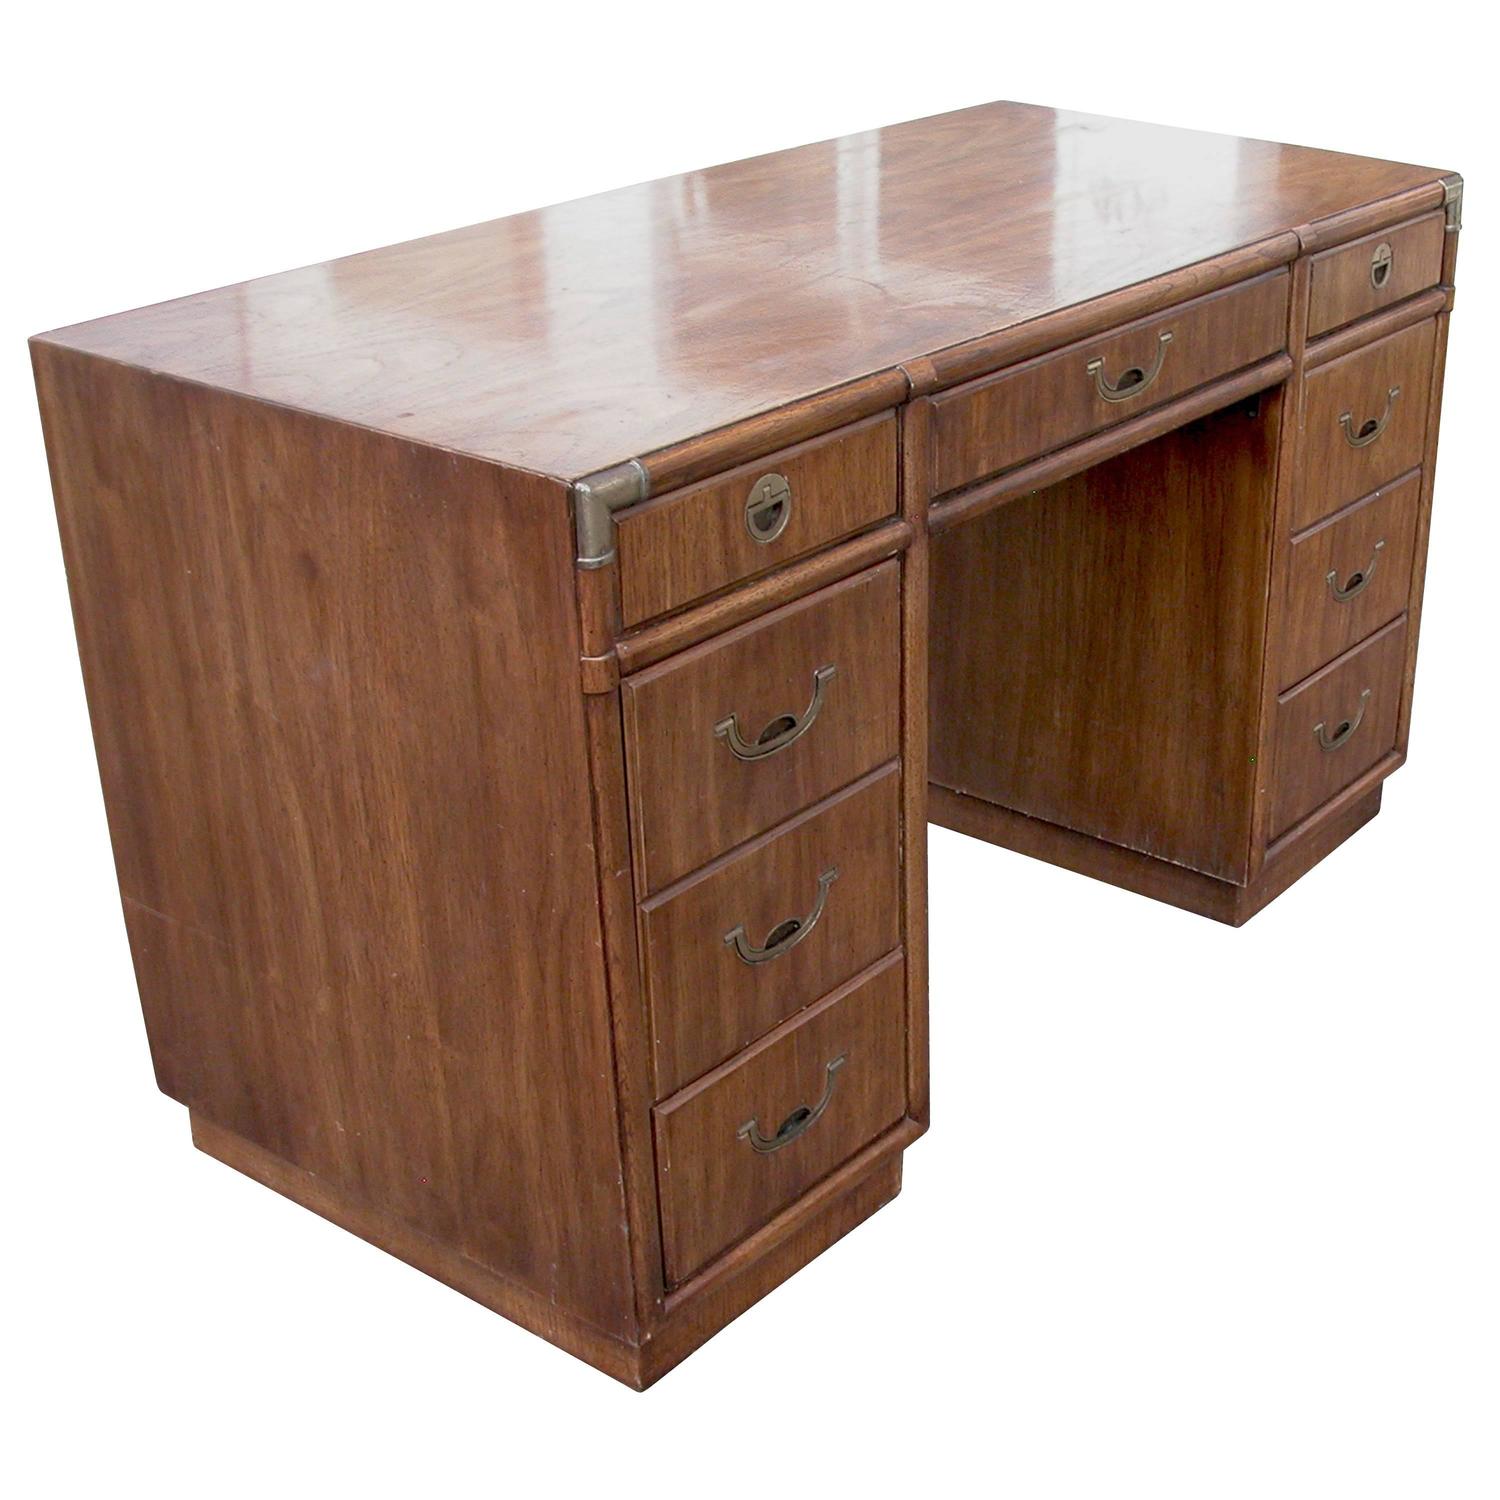 Vintage Mid Century Accolade Drexel Campaign Desk For Sale At 1stdibs